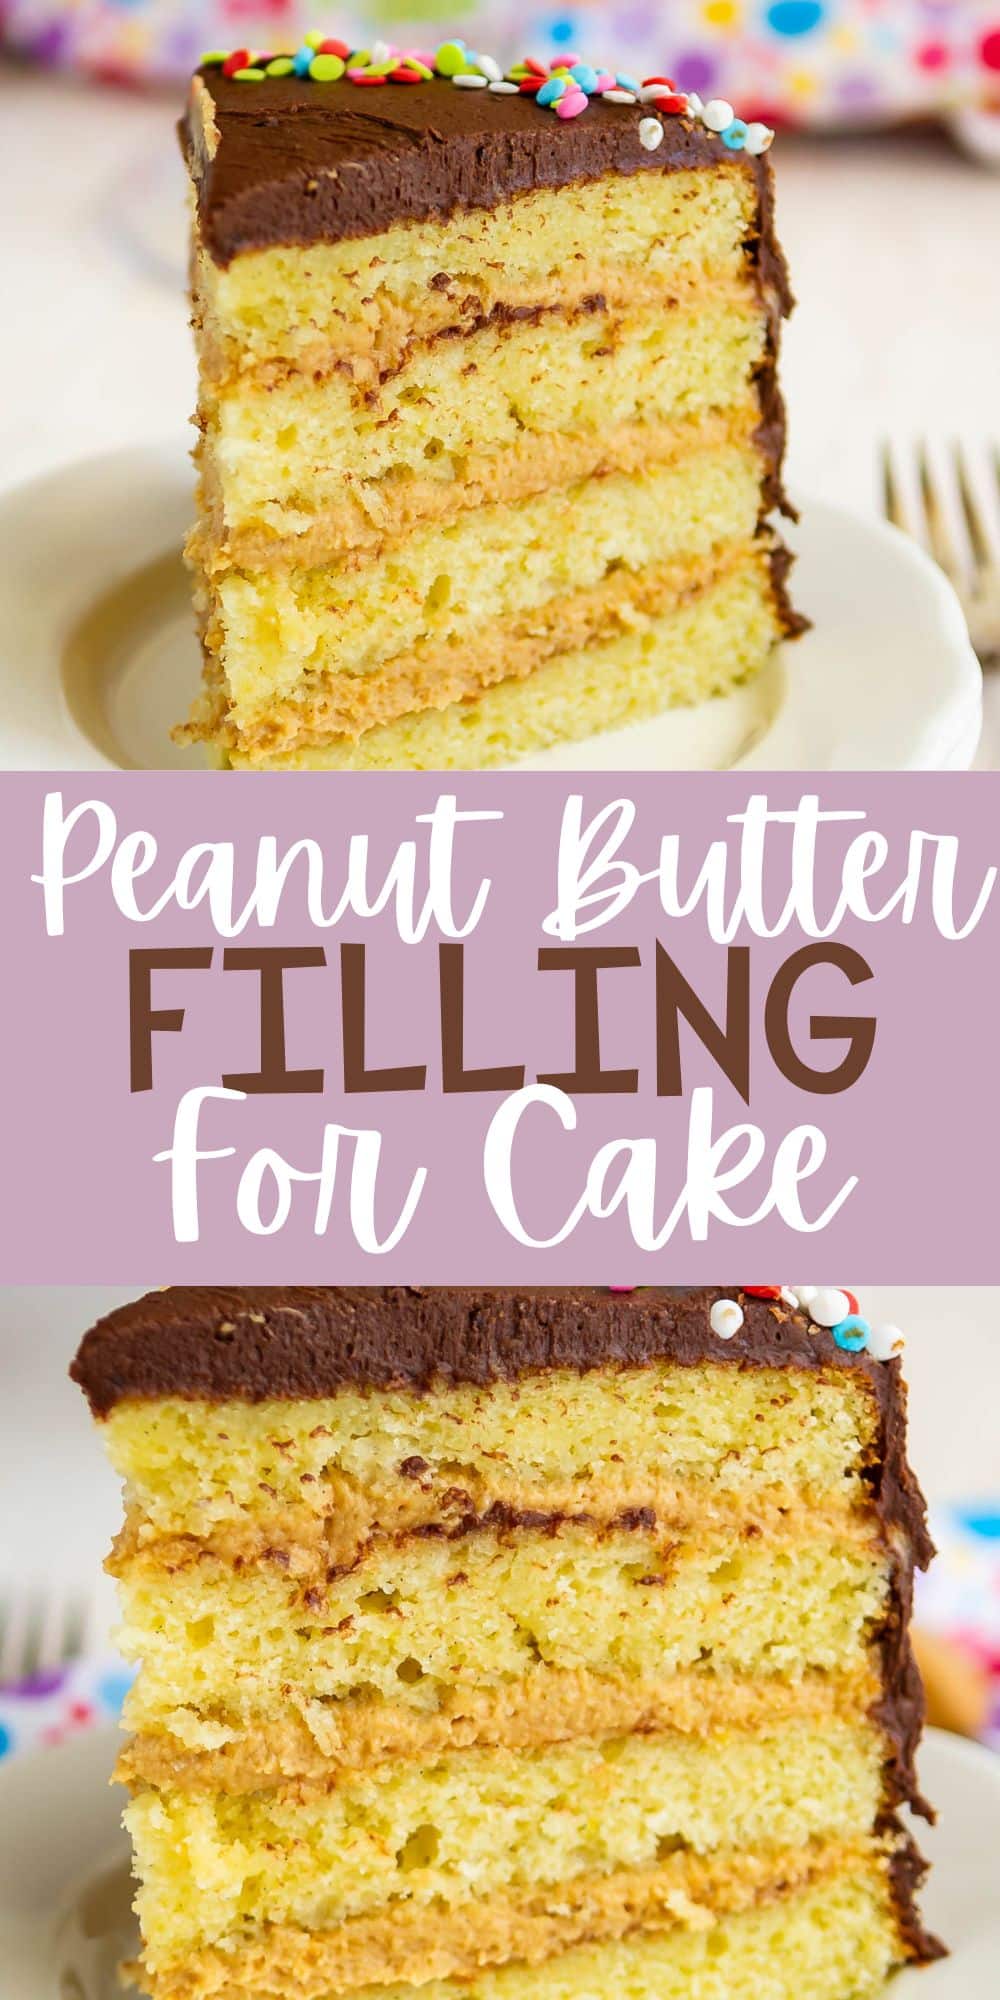 two photos of one slice of yellow cake with peanut butter frosting with words on the image.